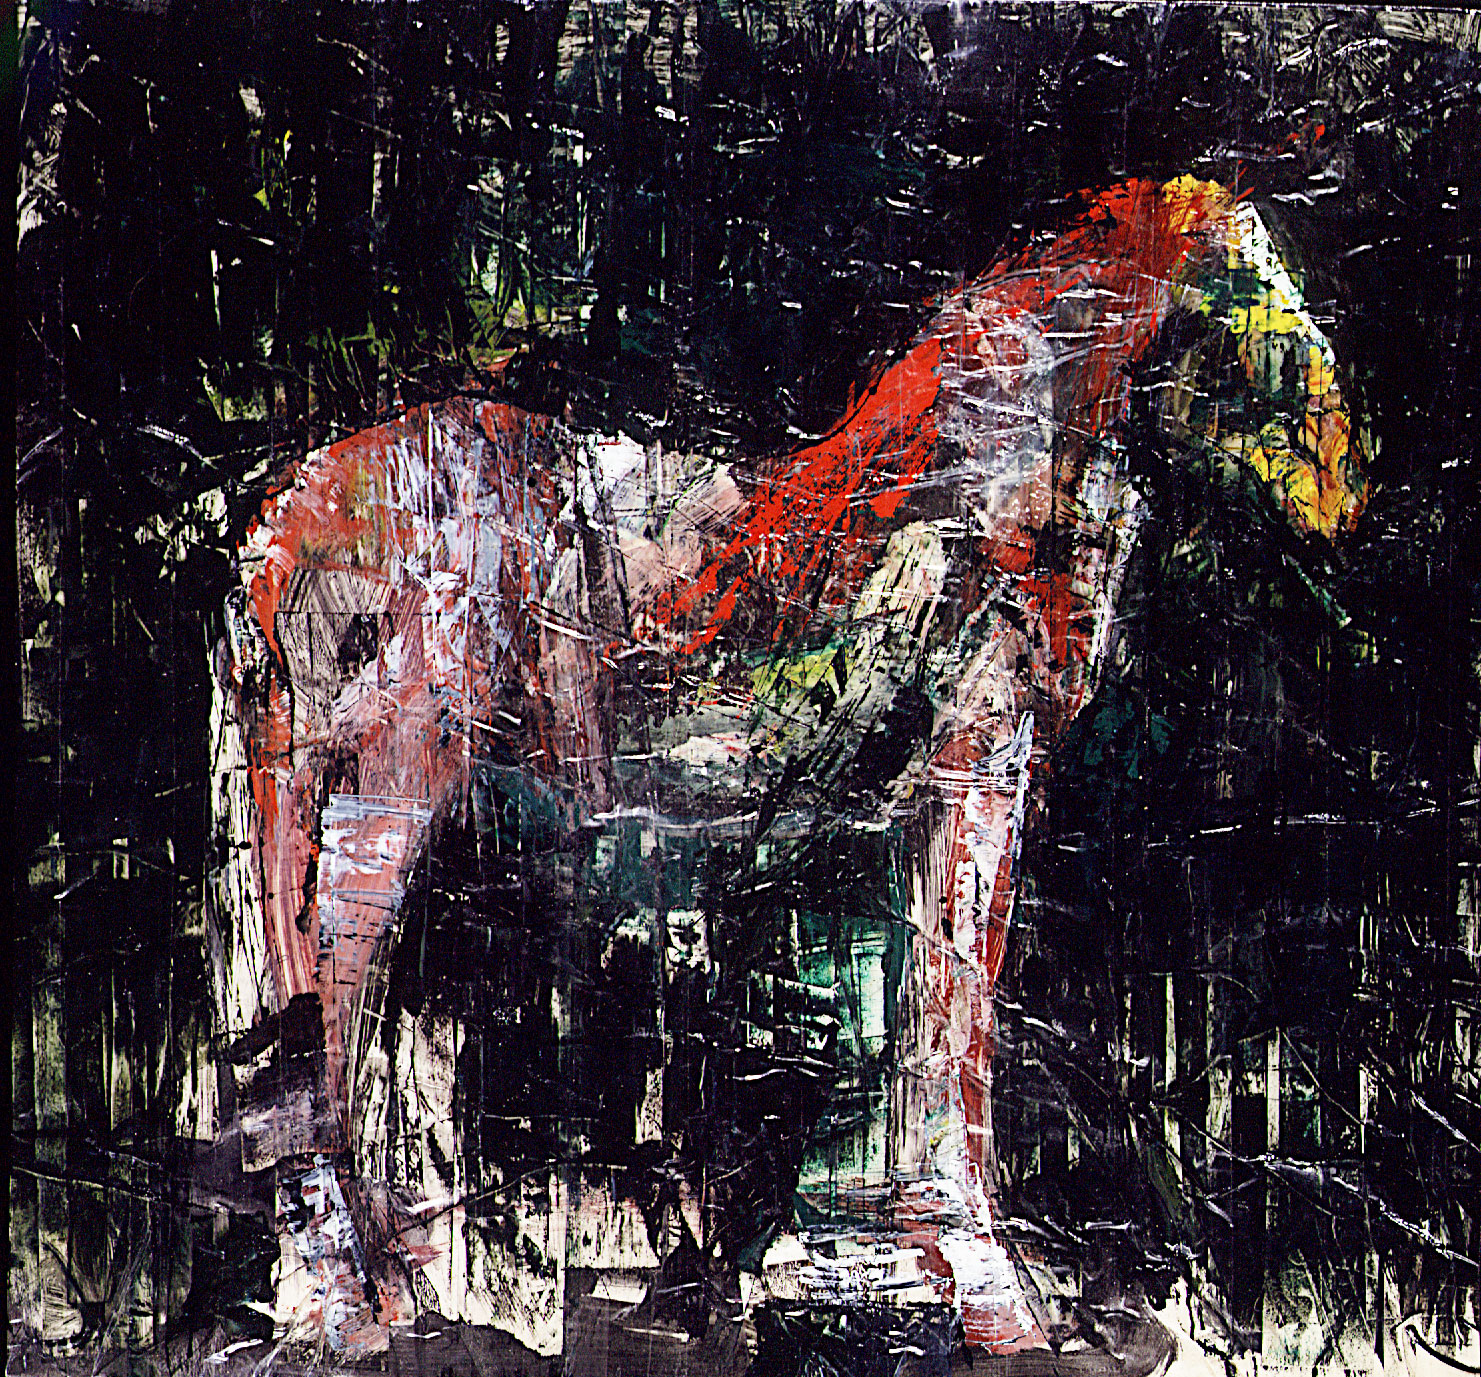 Horse, in tape and oil